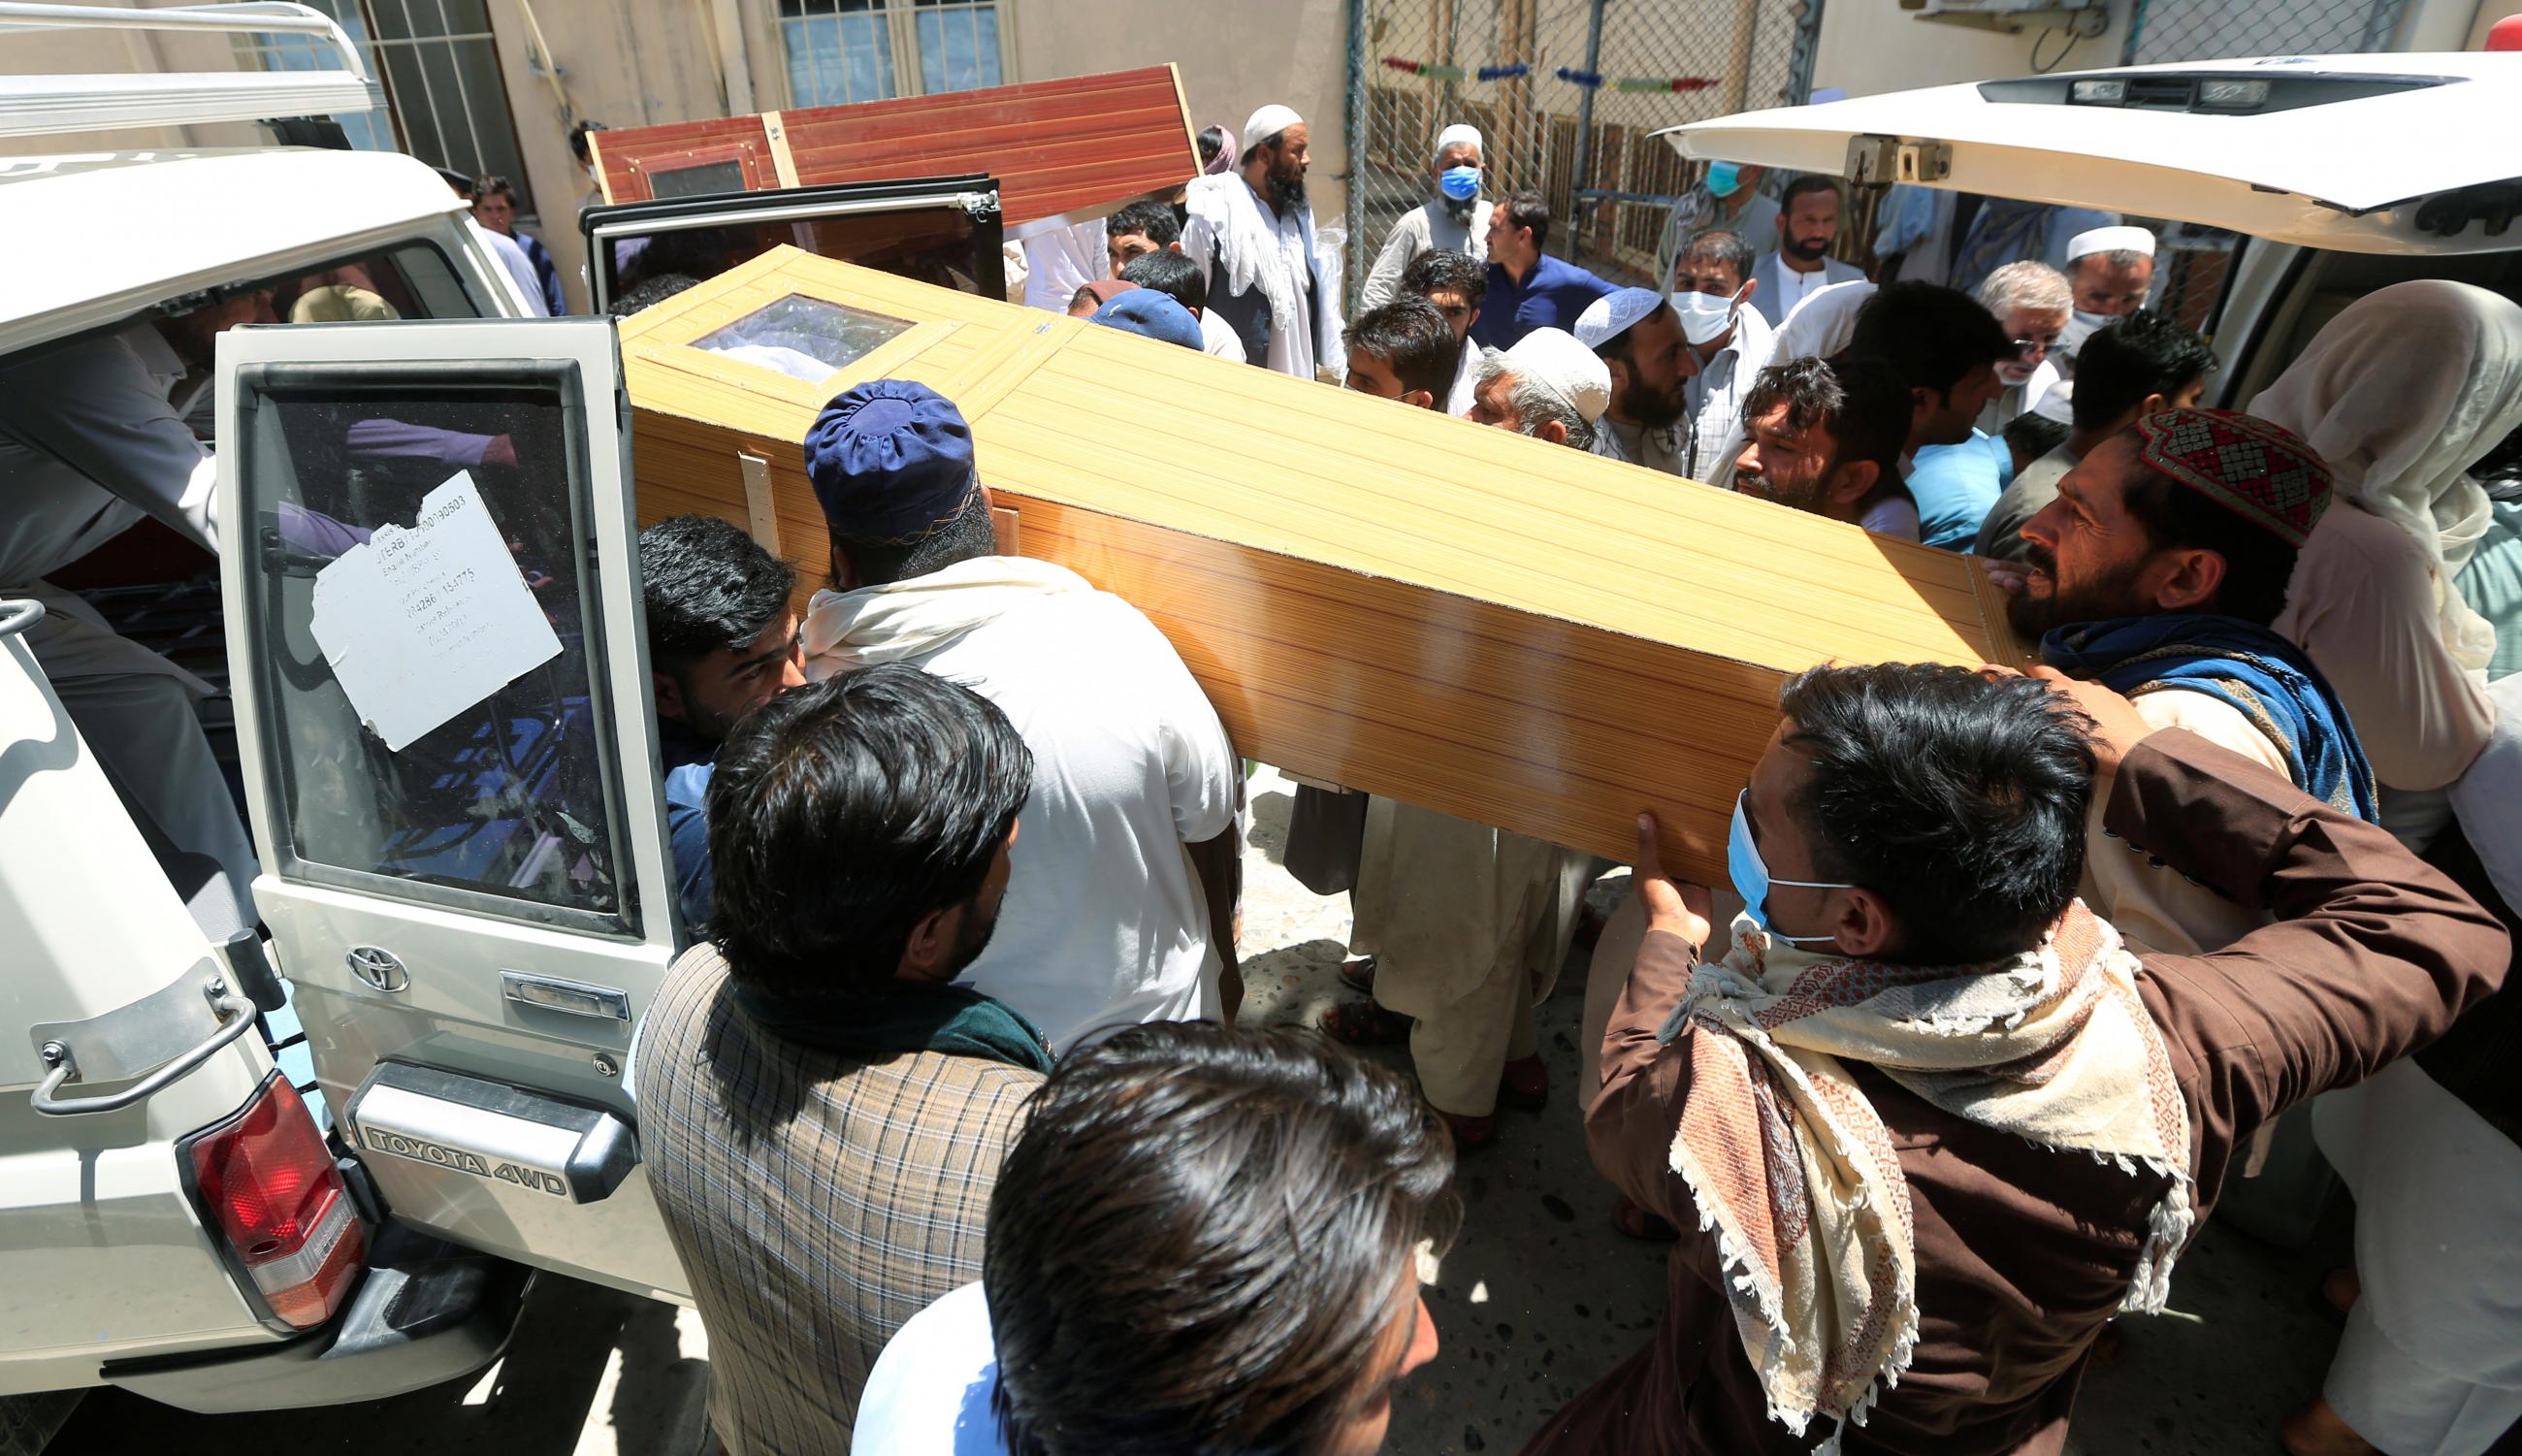 Afghan men carry the coffin of a polio vaccination health worker who was shot and killed by unknown gunmen. Photo taken in Jalalabad, Afghanistan, on June 15, 2021.